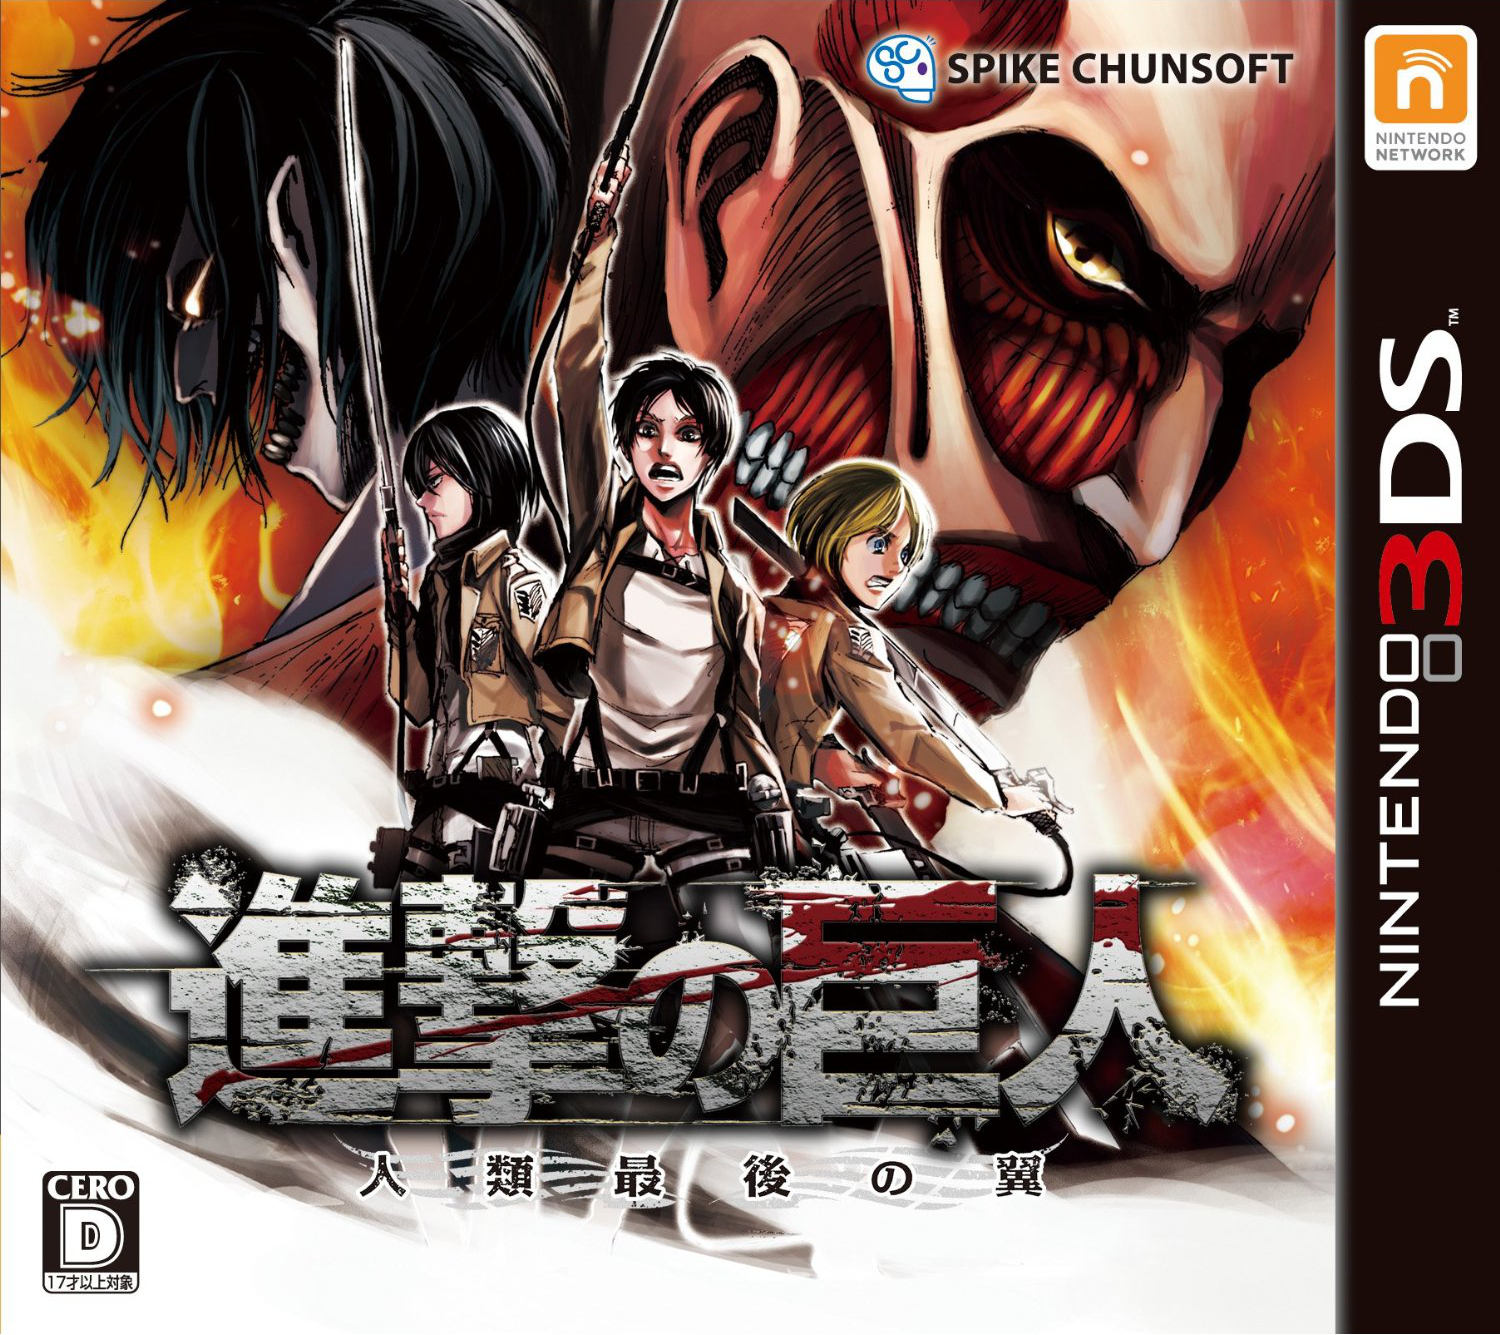 Attack on Titan: Humanity in Chains, Nintendo